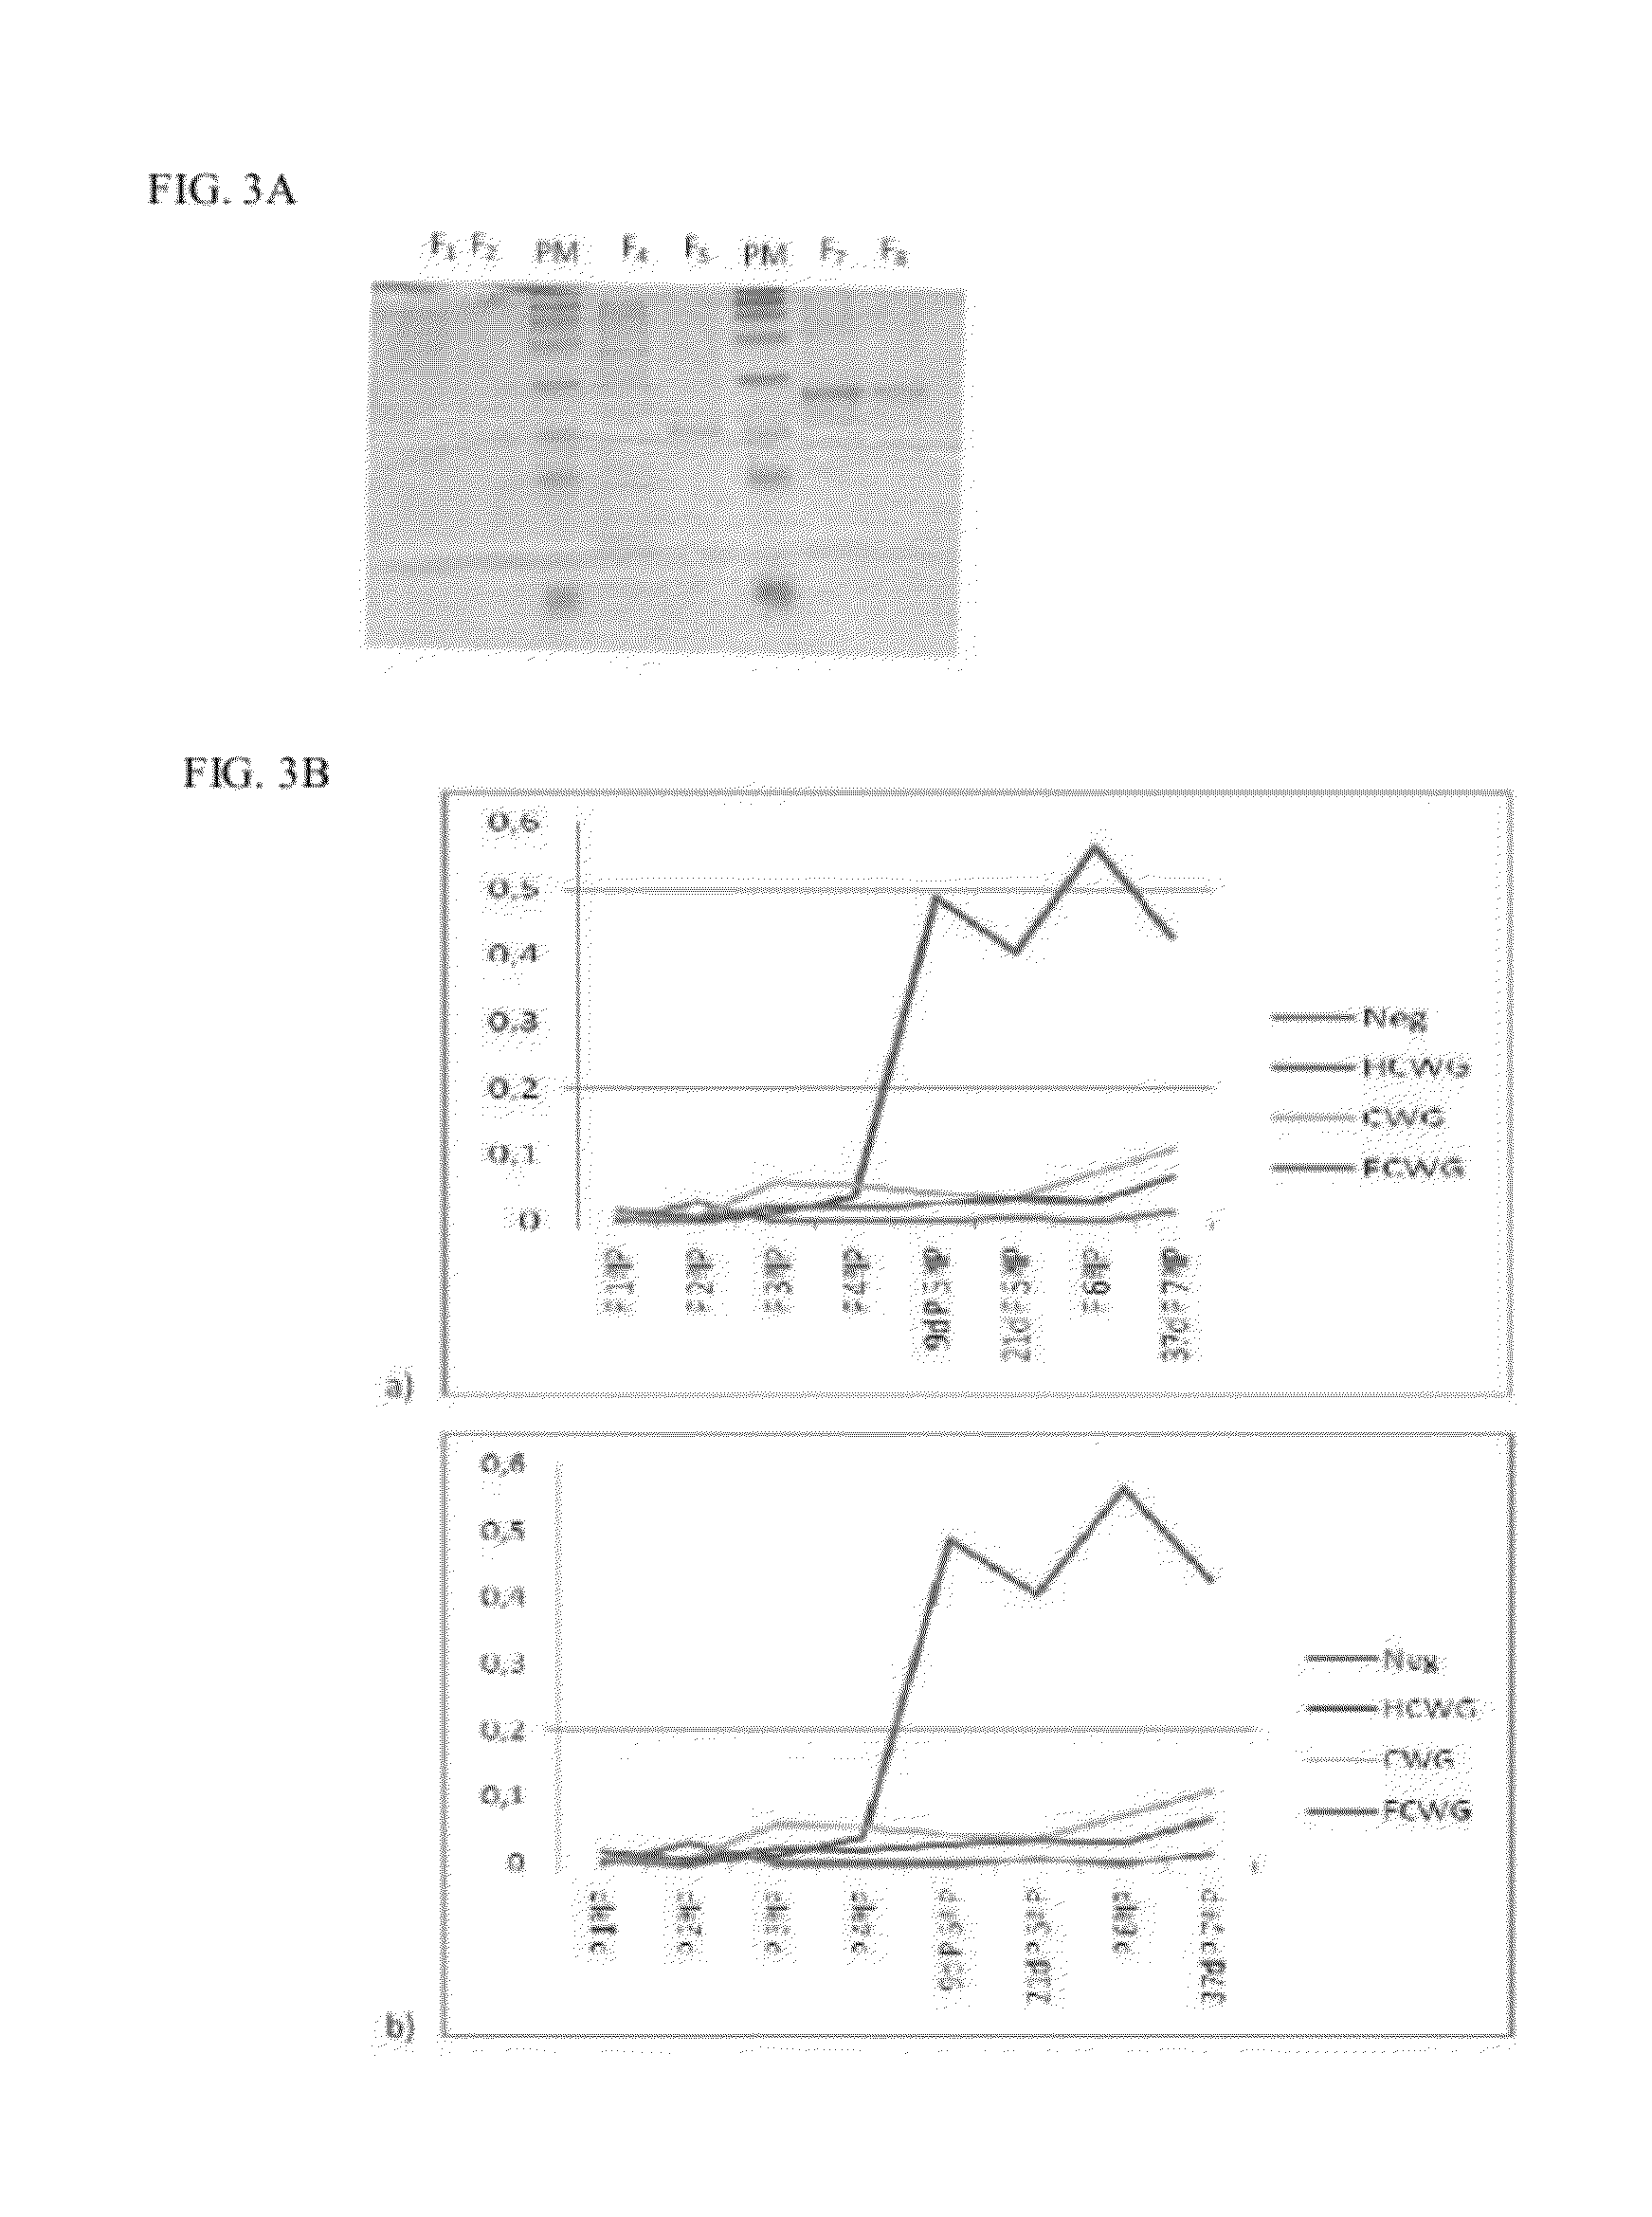 Immunogens, compositons and uses thereof, method for preparing same